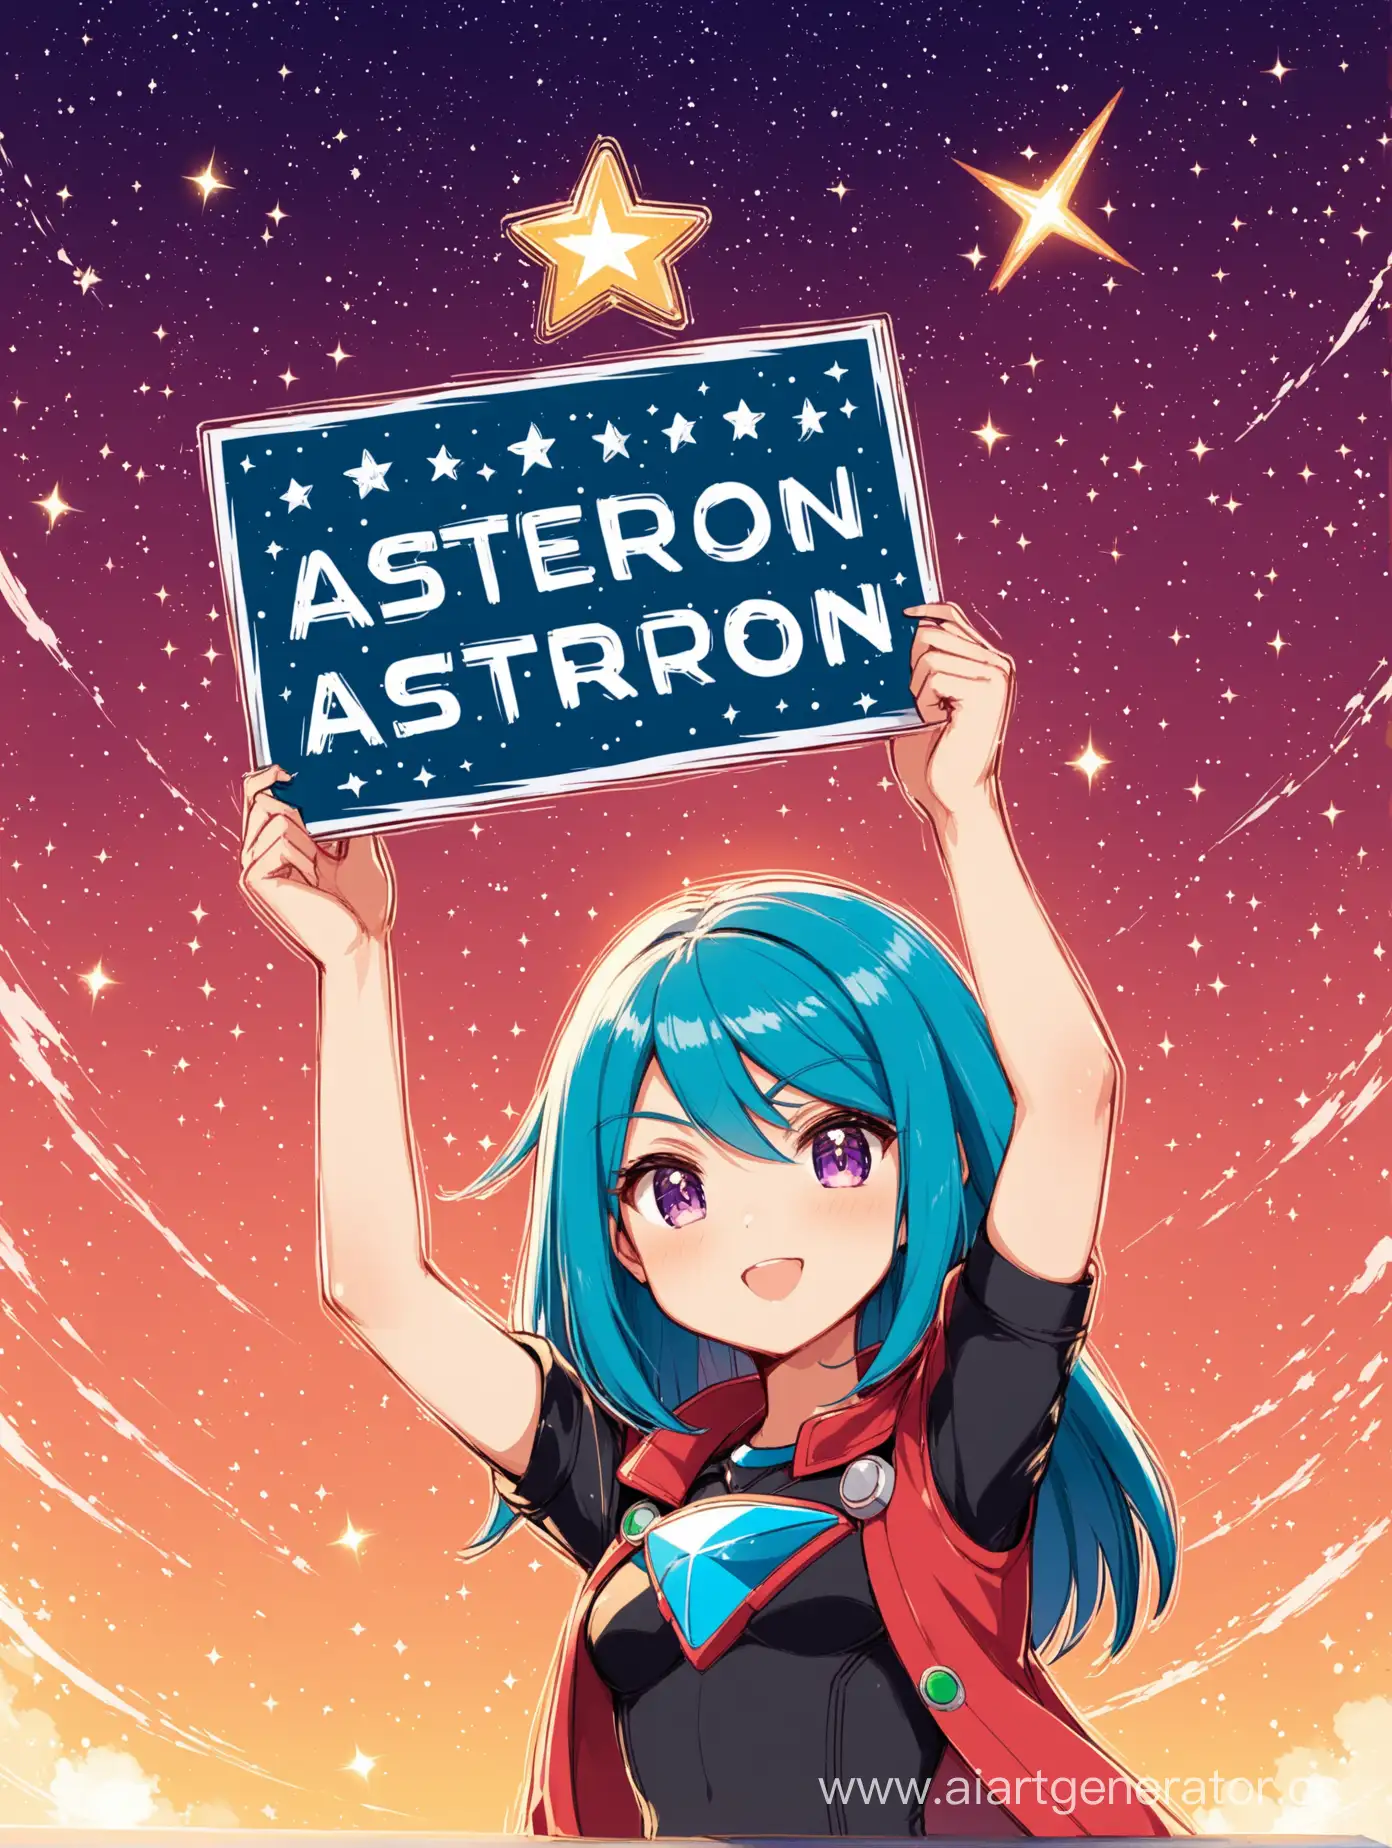 Girl-Holding-AsterStron-Sign